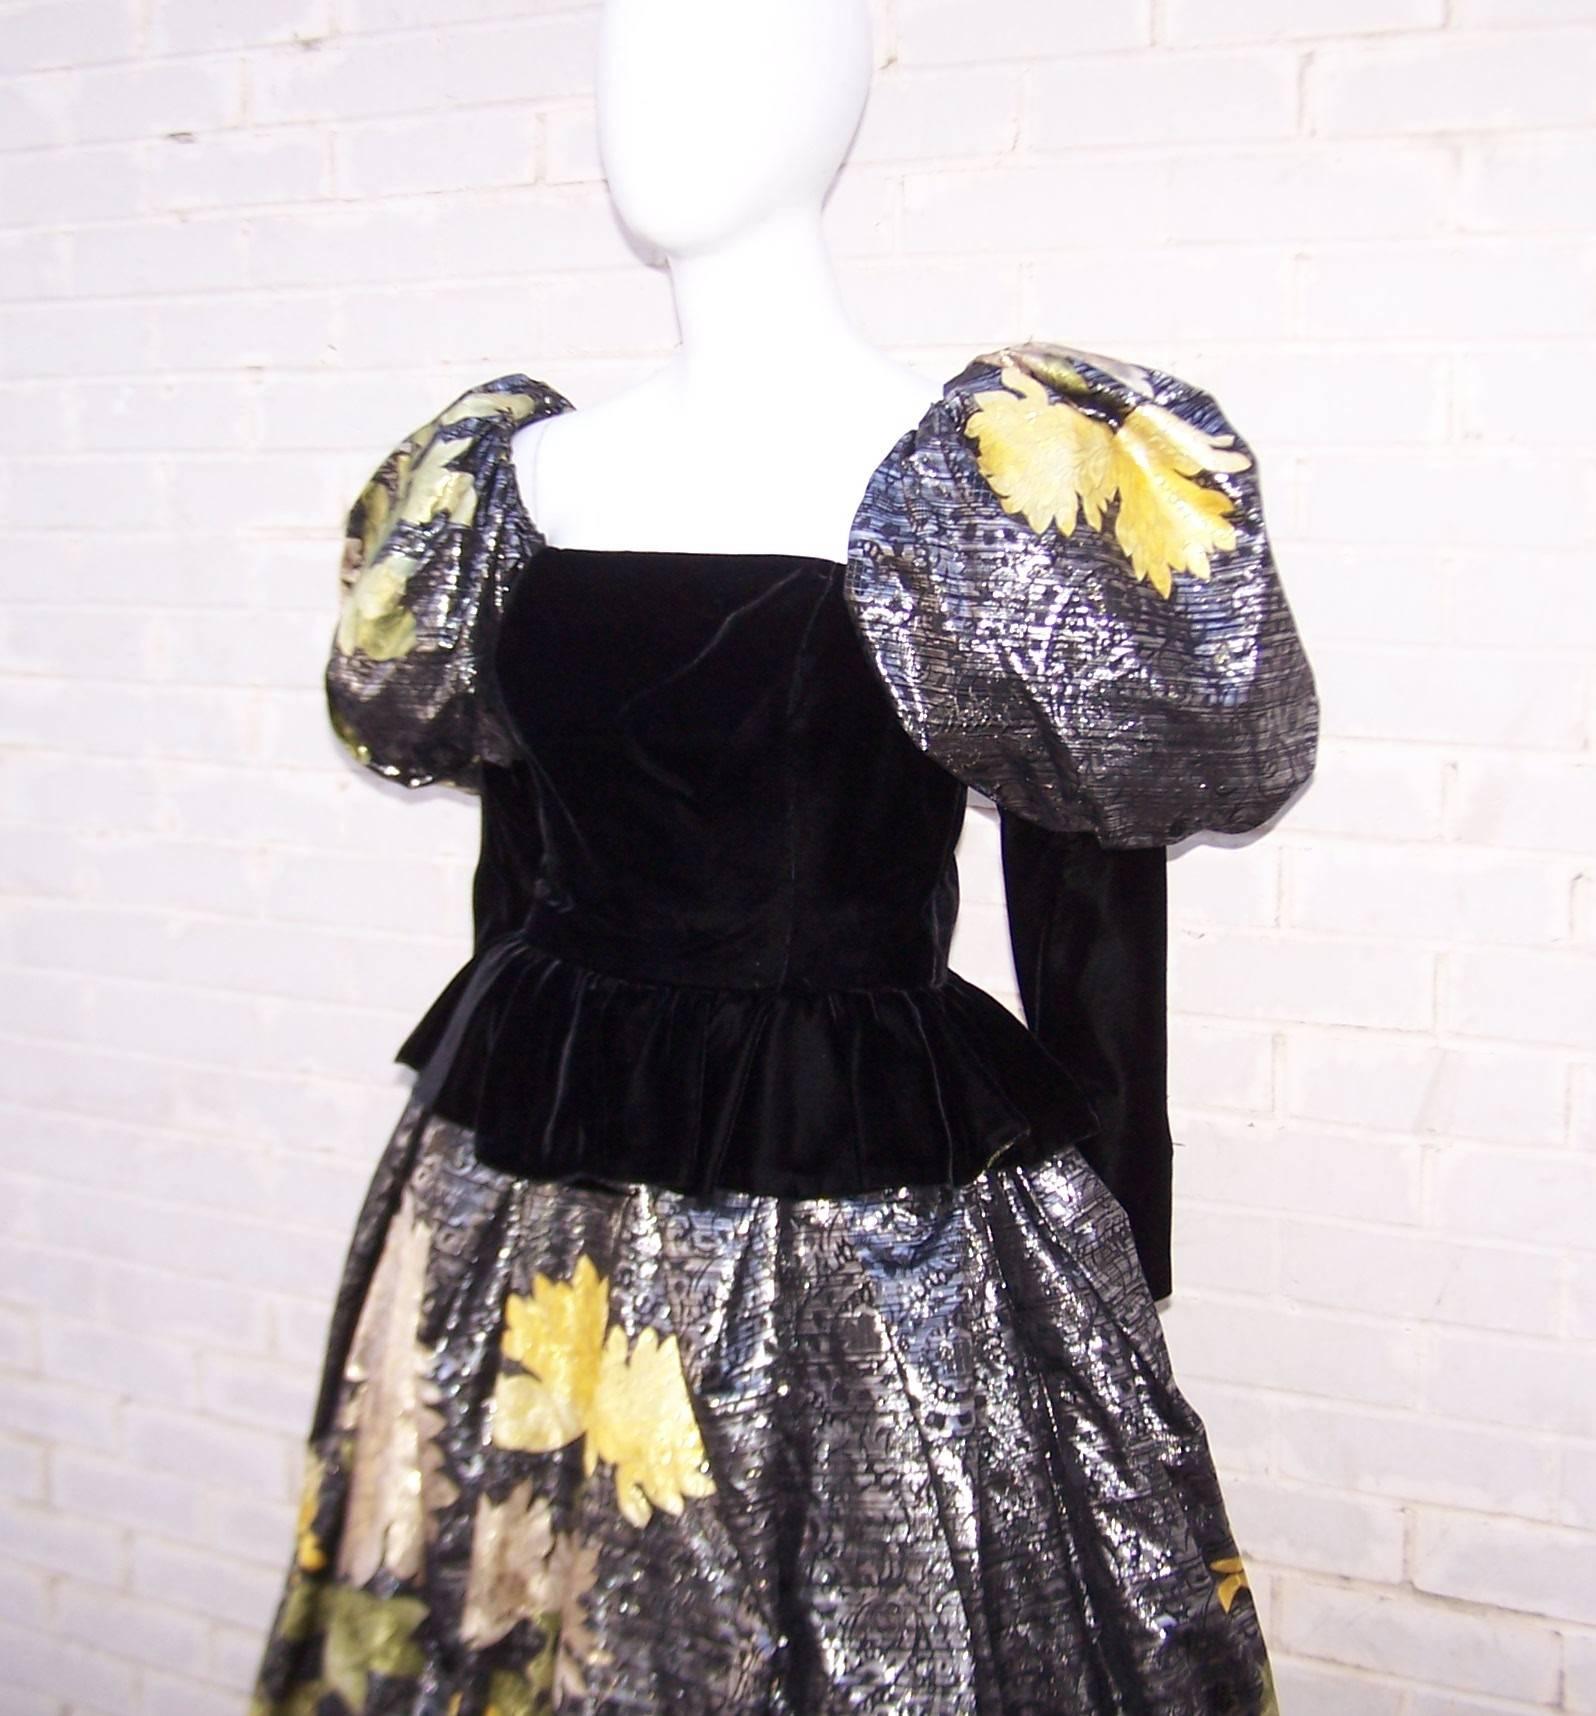 This over-the-top Leonard dress is a perfect example of the drama and opulence of fashion in the 1980's.  The fitted black velvet peplum bodice is offset by voluminous mutton sleeves and skirt made from a luxurious metallic silk fabric.  There is an